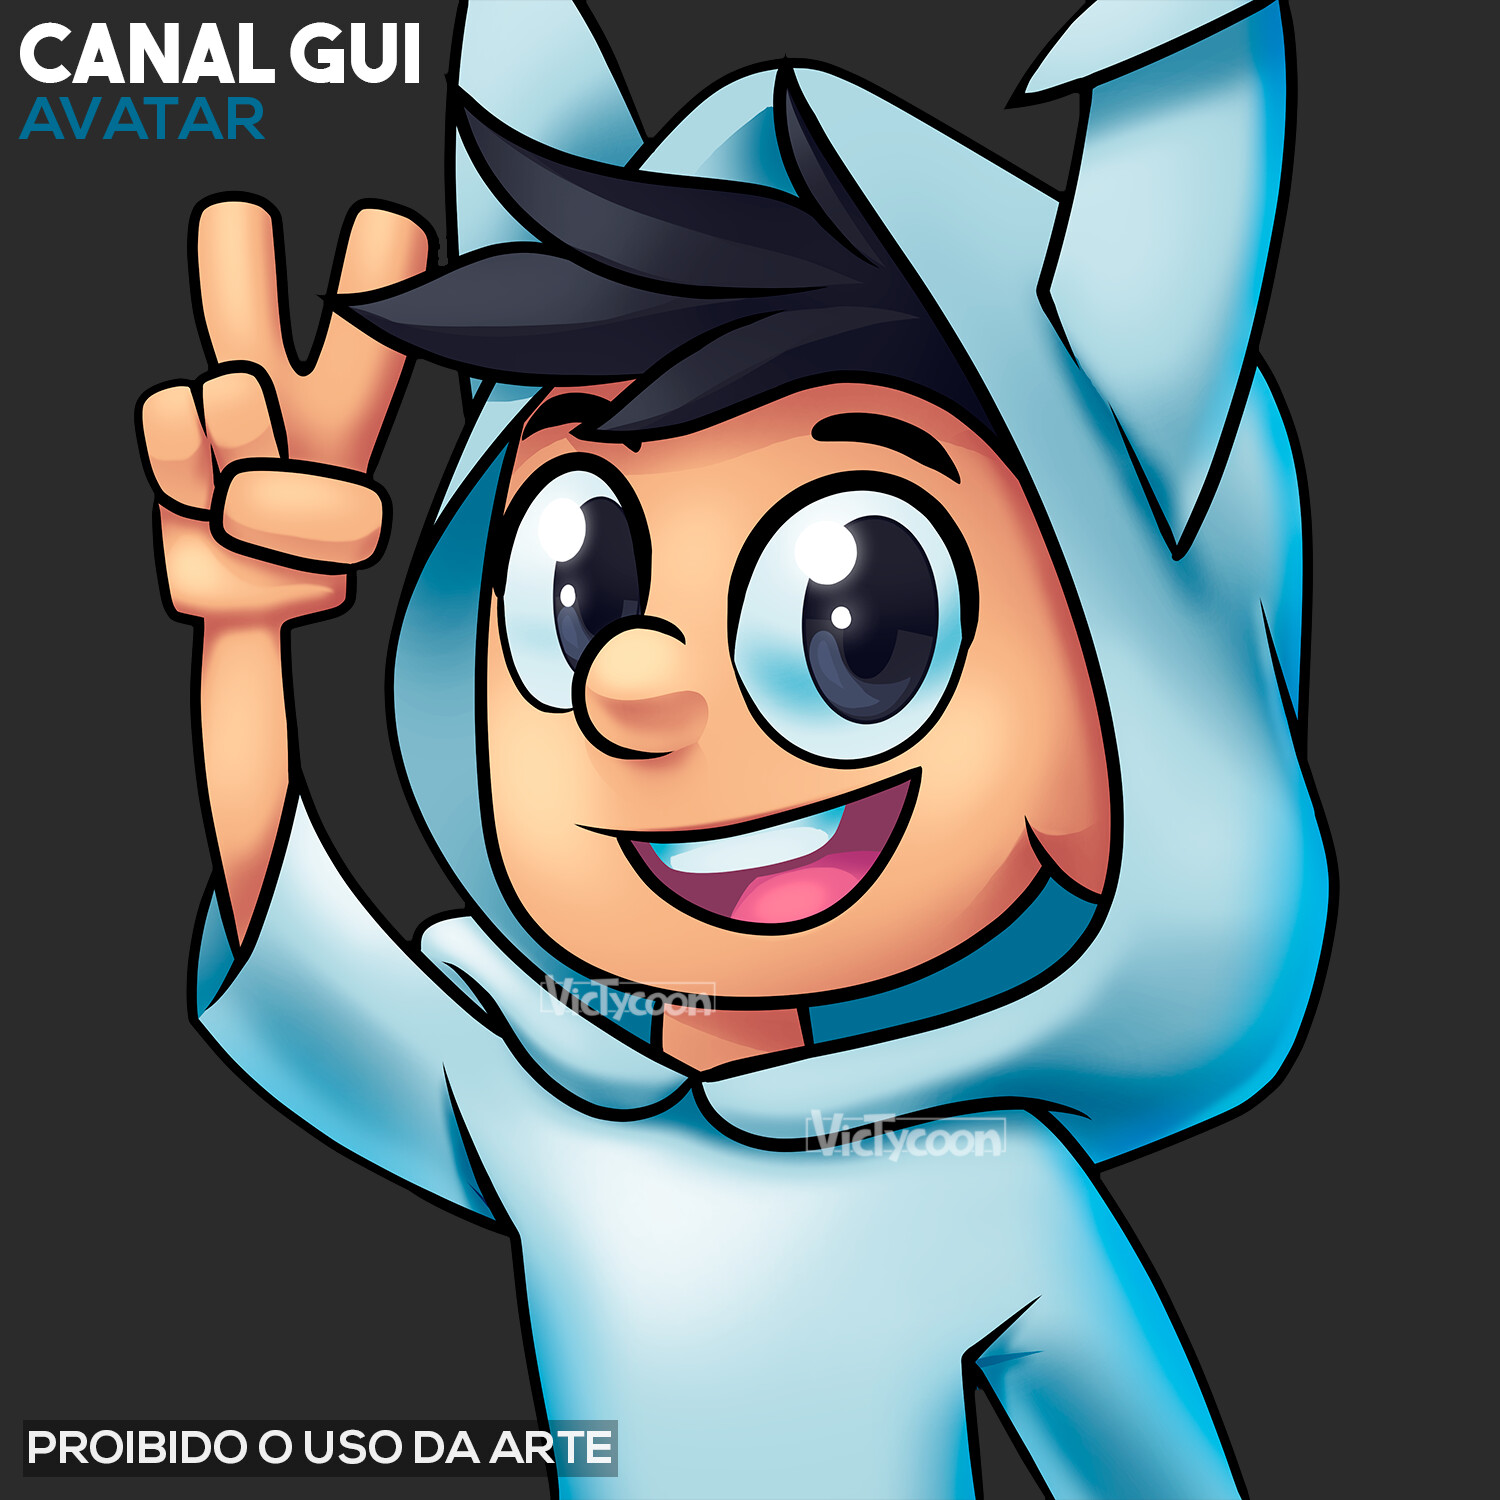 Victycoon Art Avatar Canal Guii